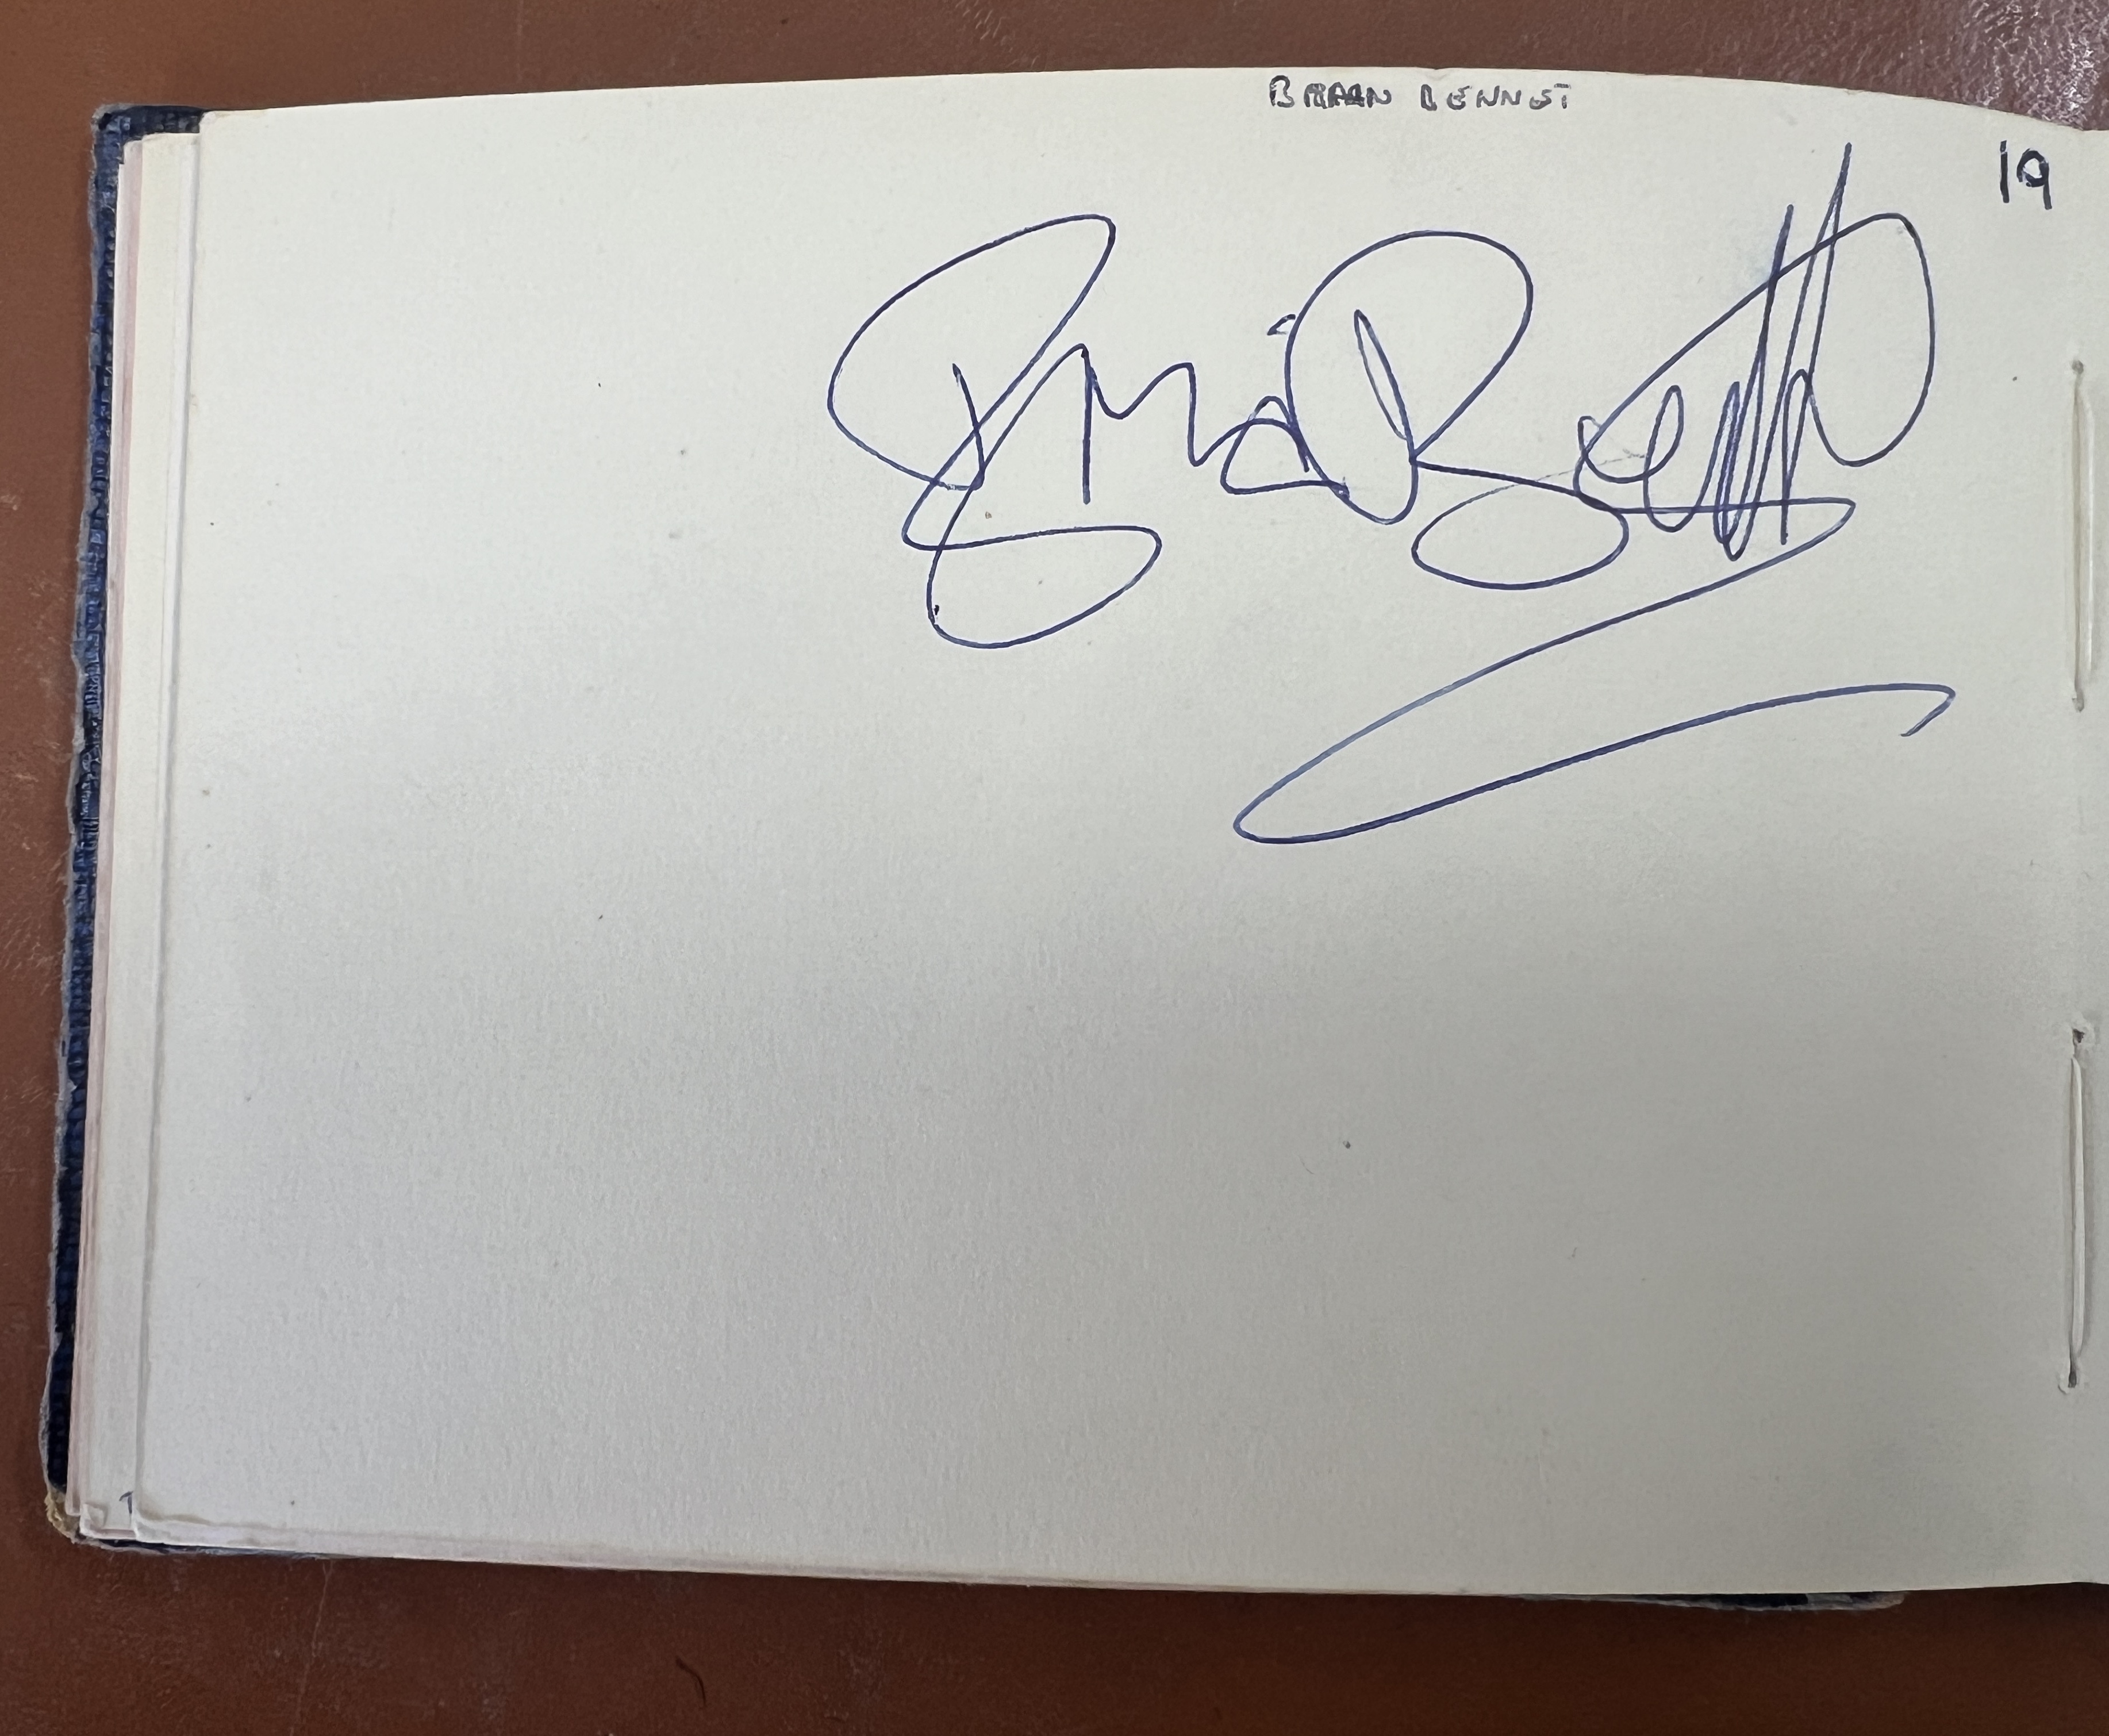 A 1960's autograph album containing autographs of various celebrities including Cliff Richard, - Image 33 of 37